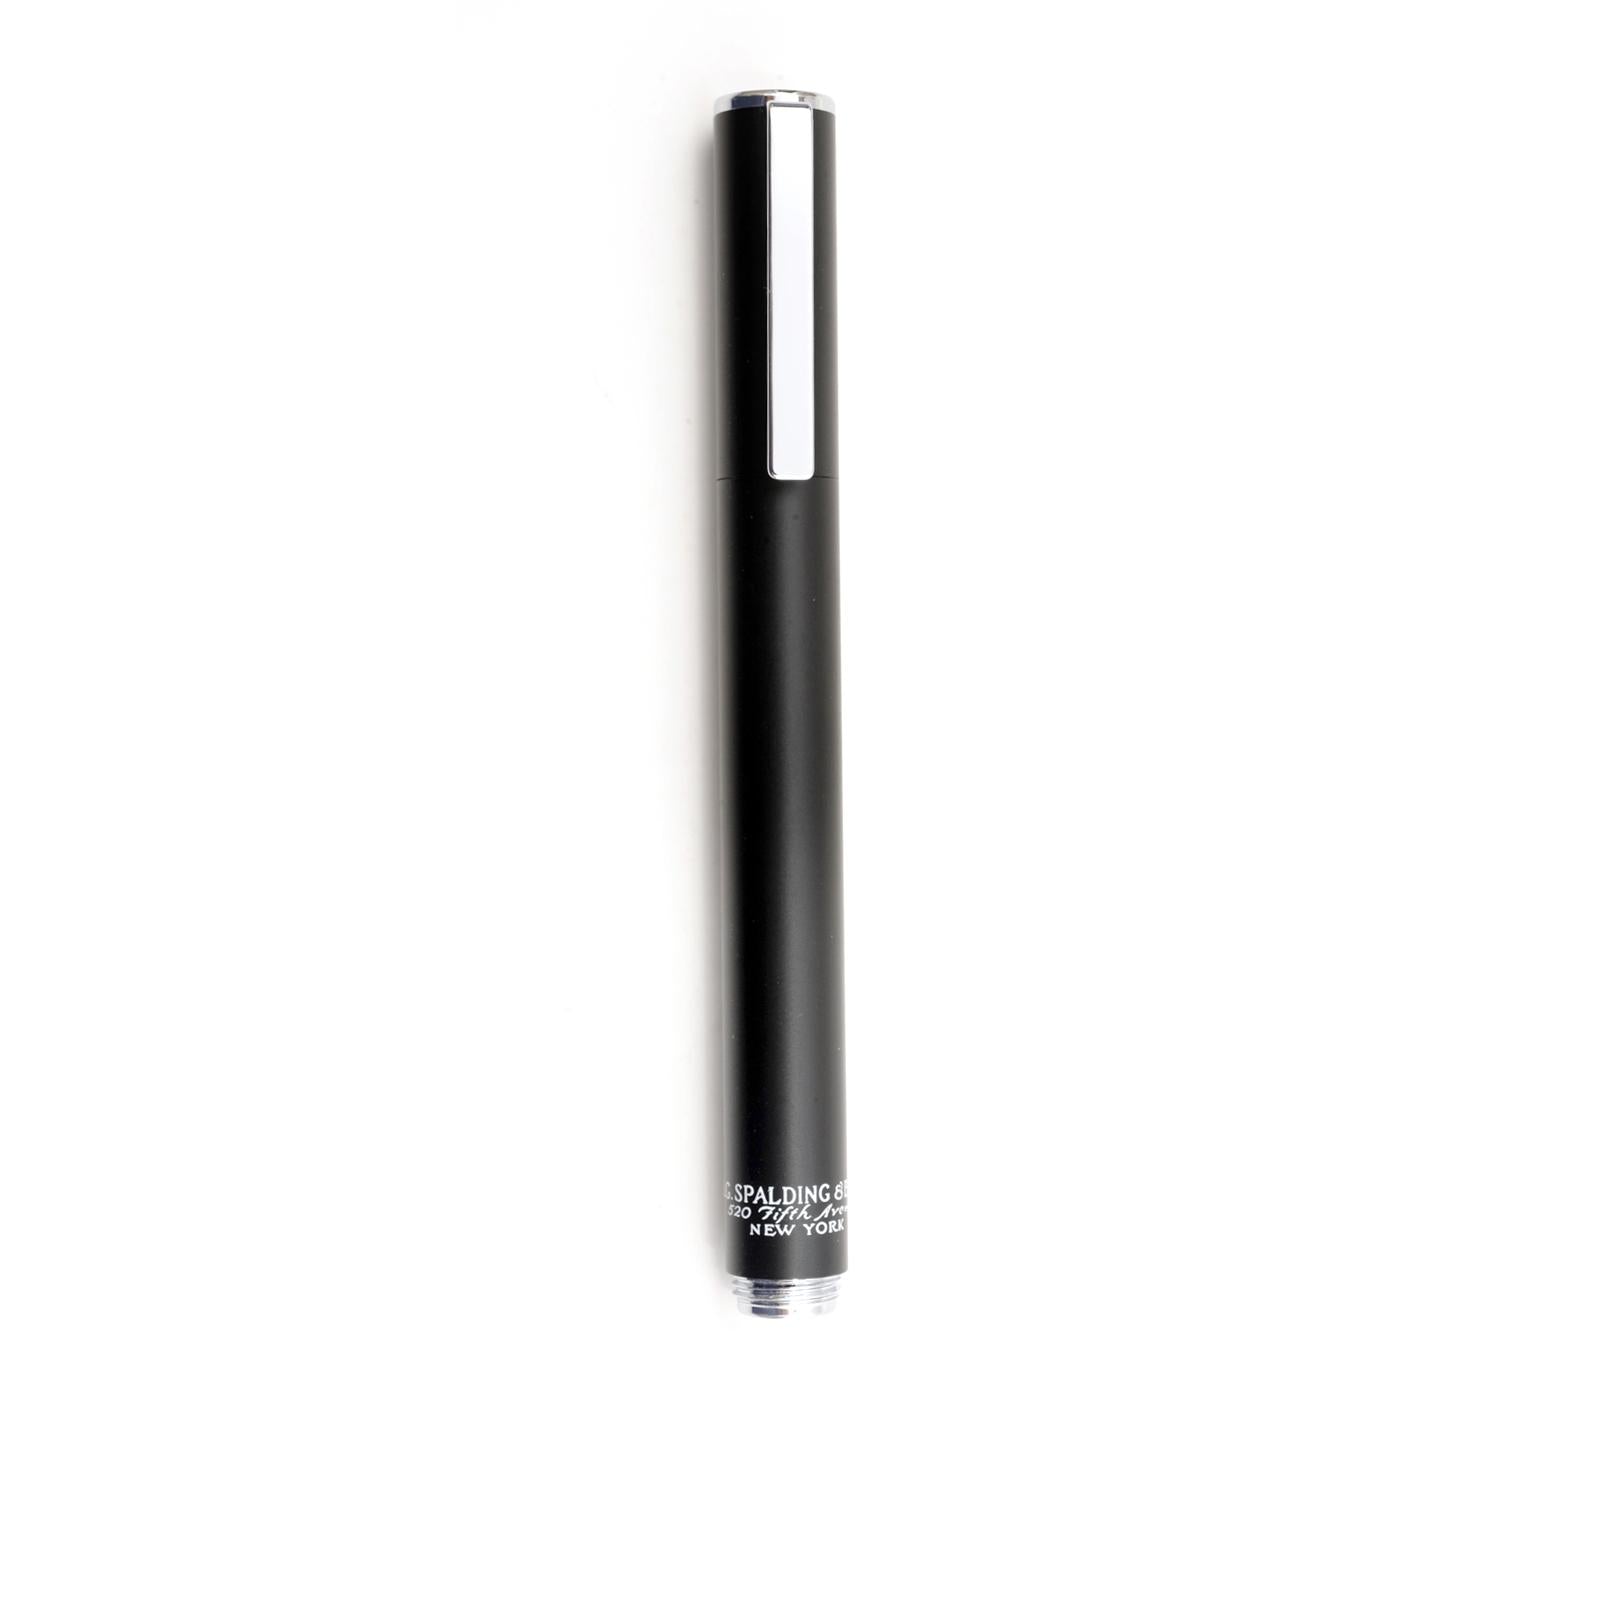 PENNA COMPACT ROLLER NERO